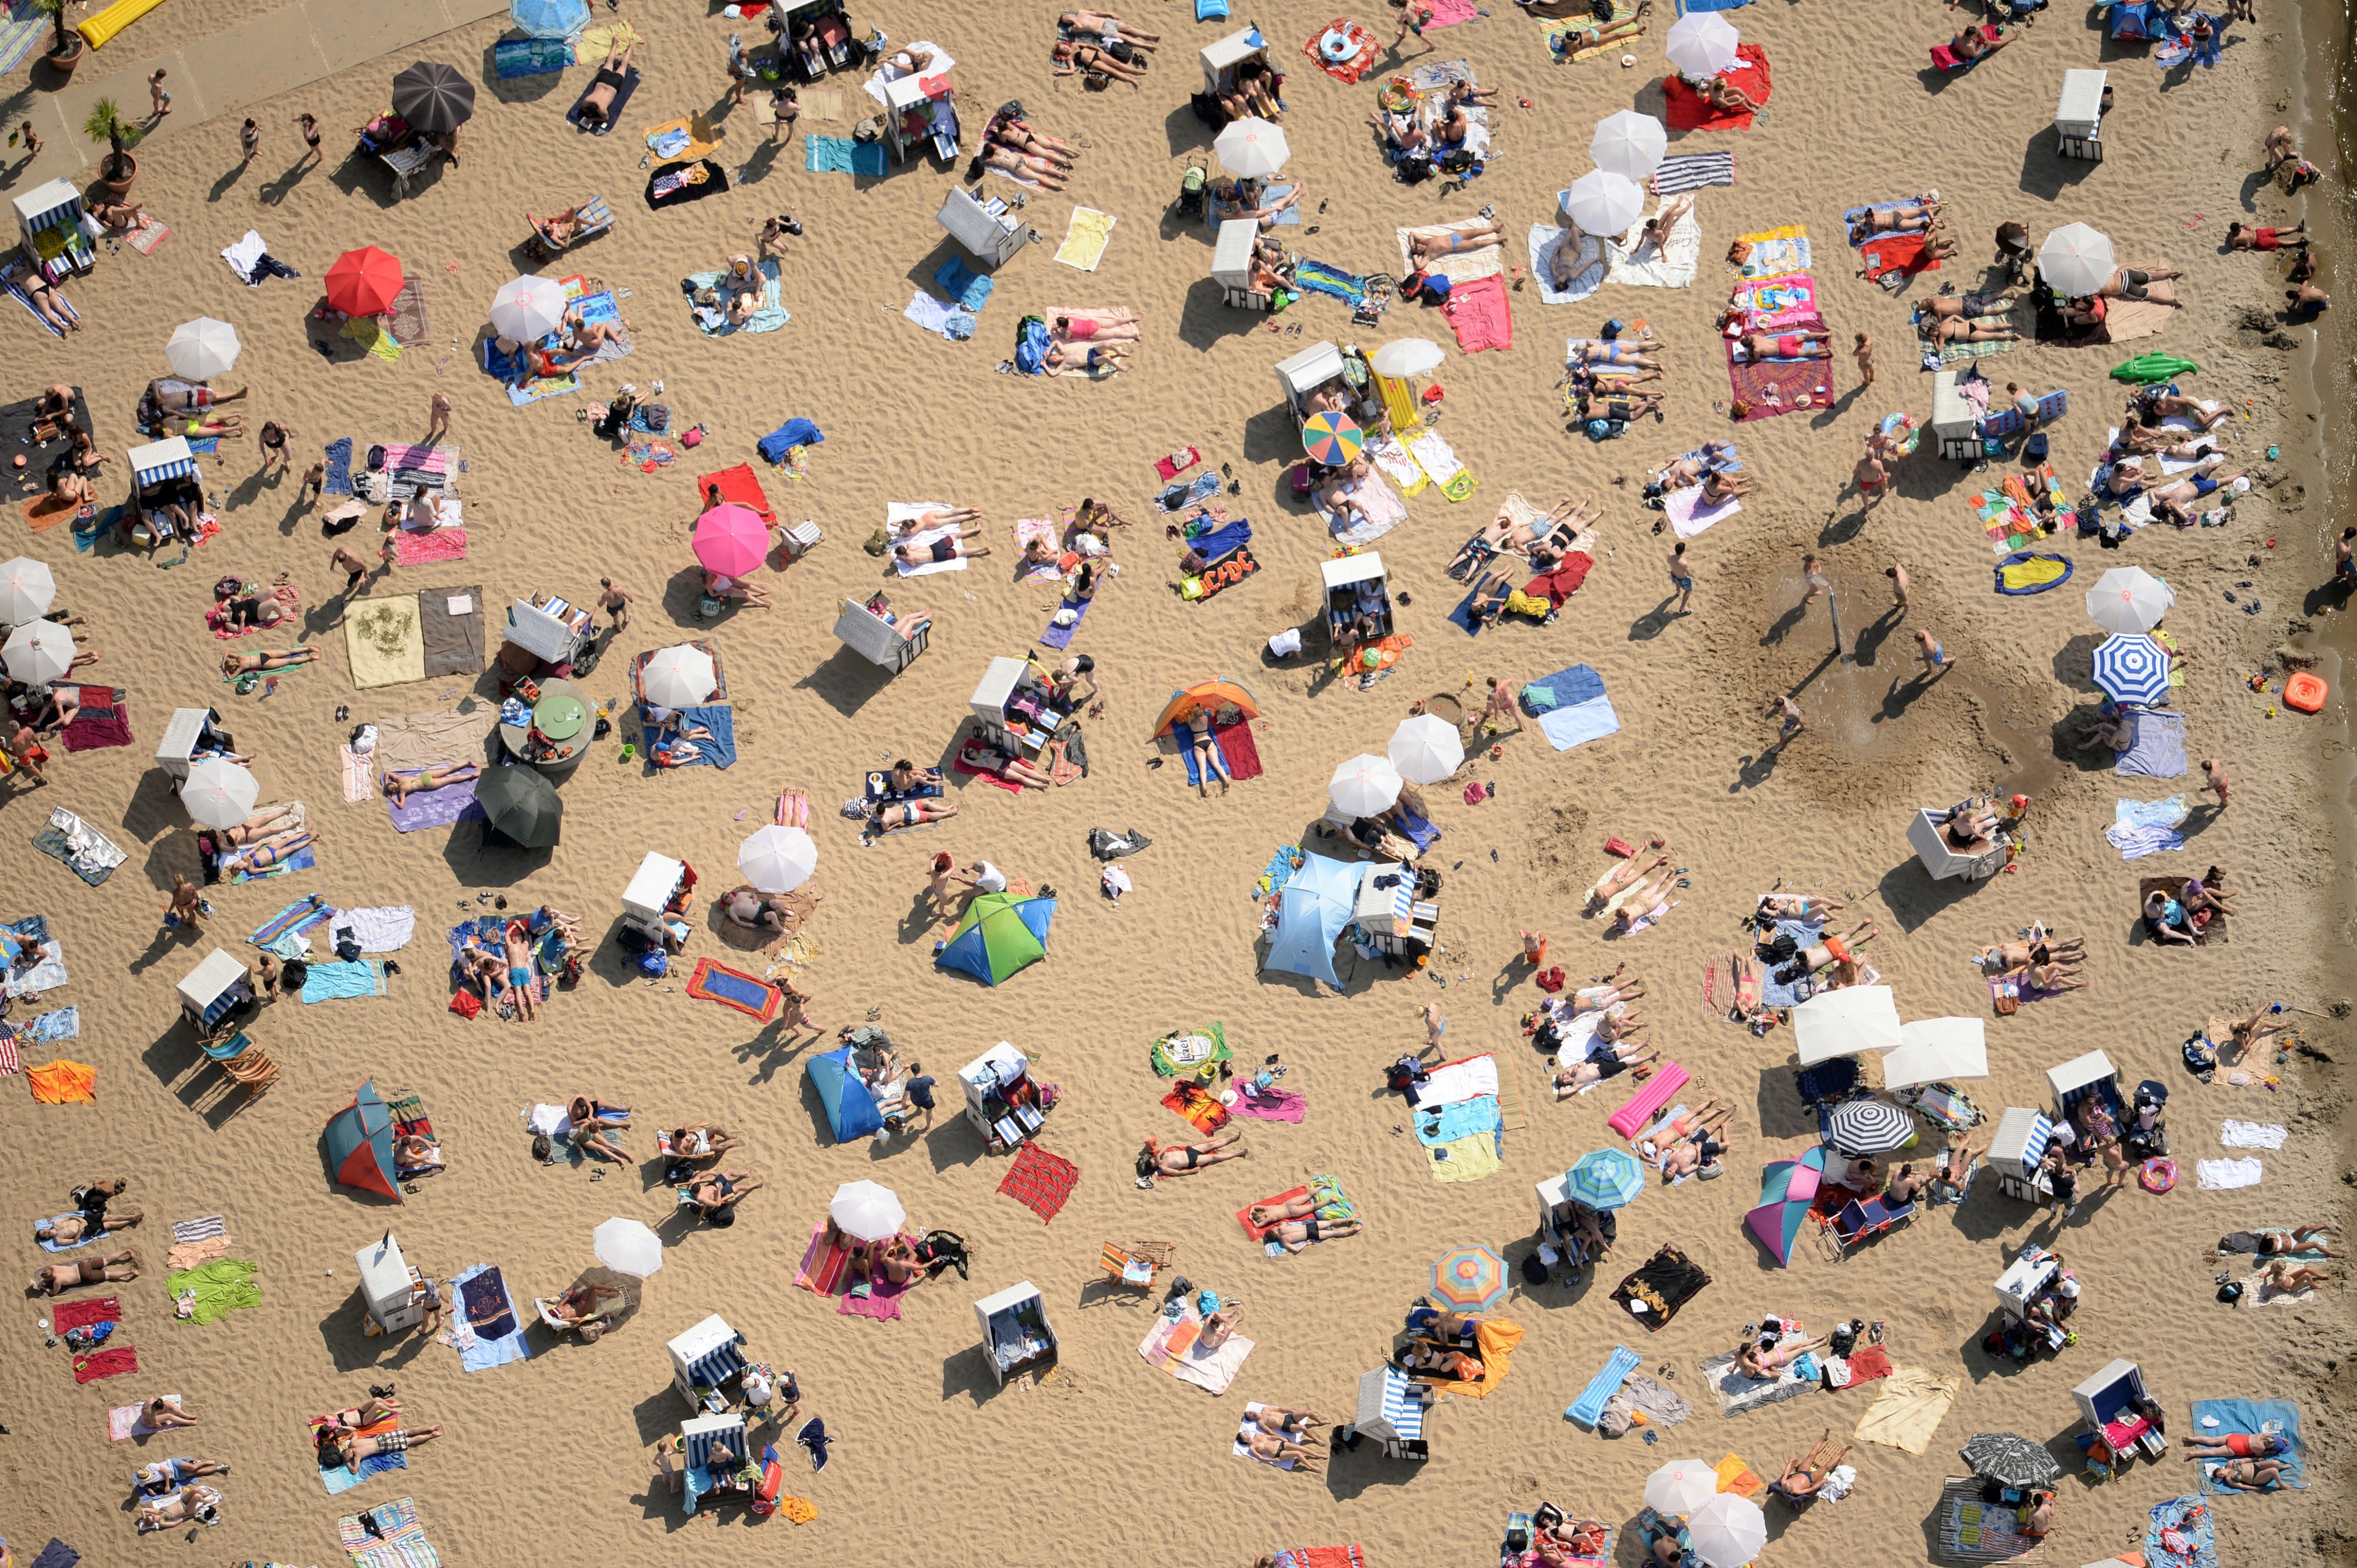 An aerial view shows people crowding the beach of the lake Wannsee in Berlin, eastern Germany, on June 8, 2014. (Ralf Hirschberger—AFP/Getty Images)